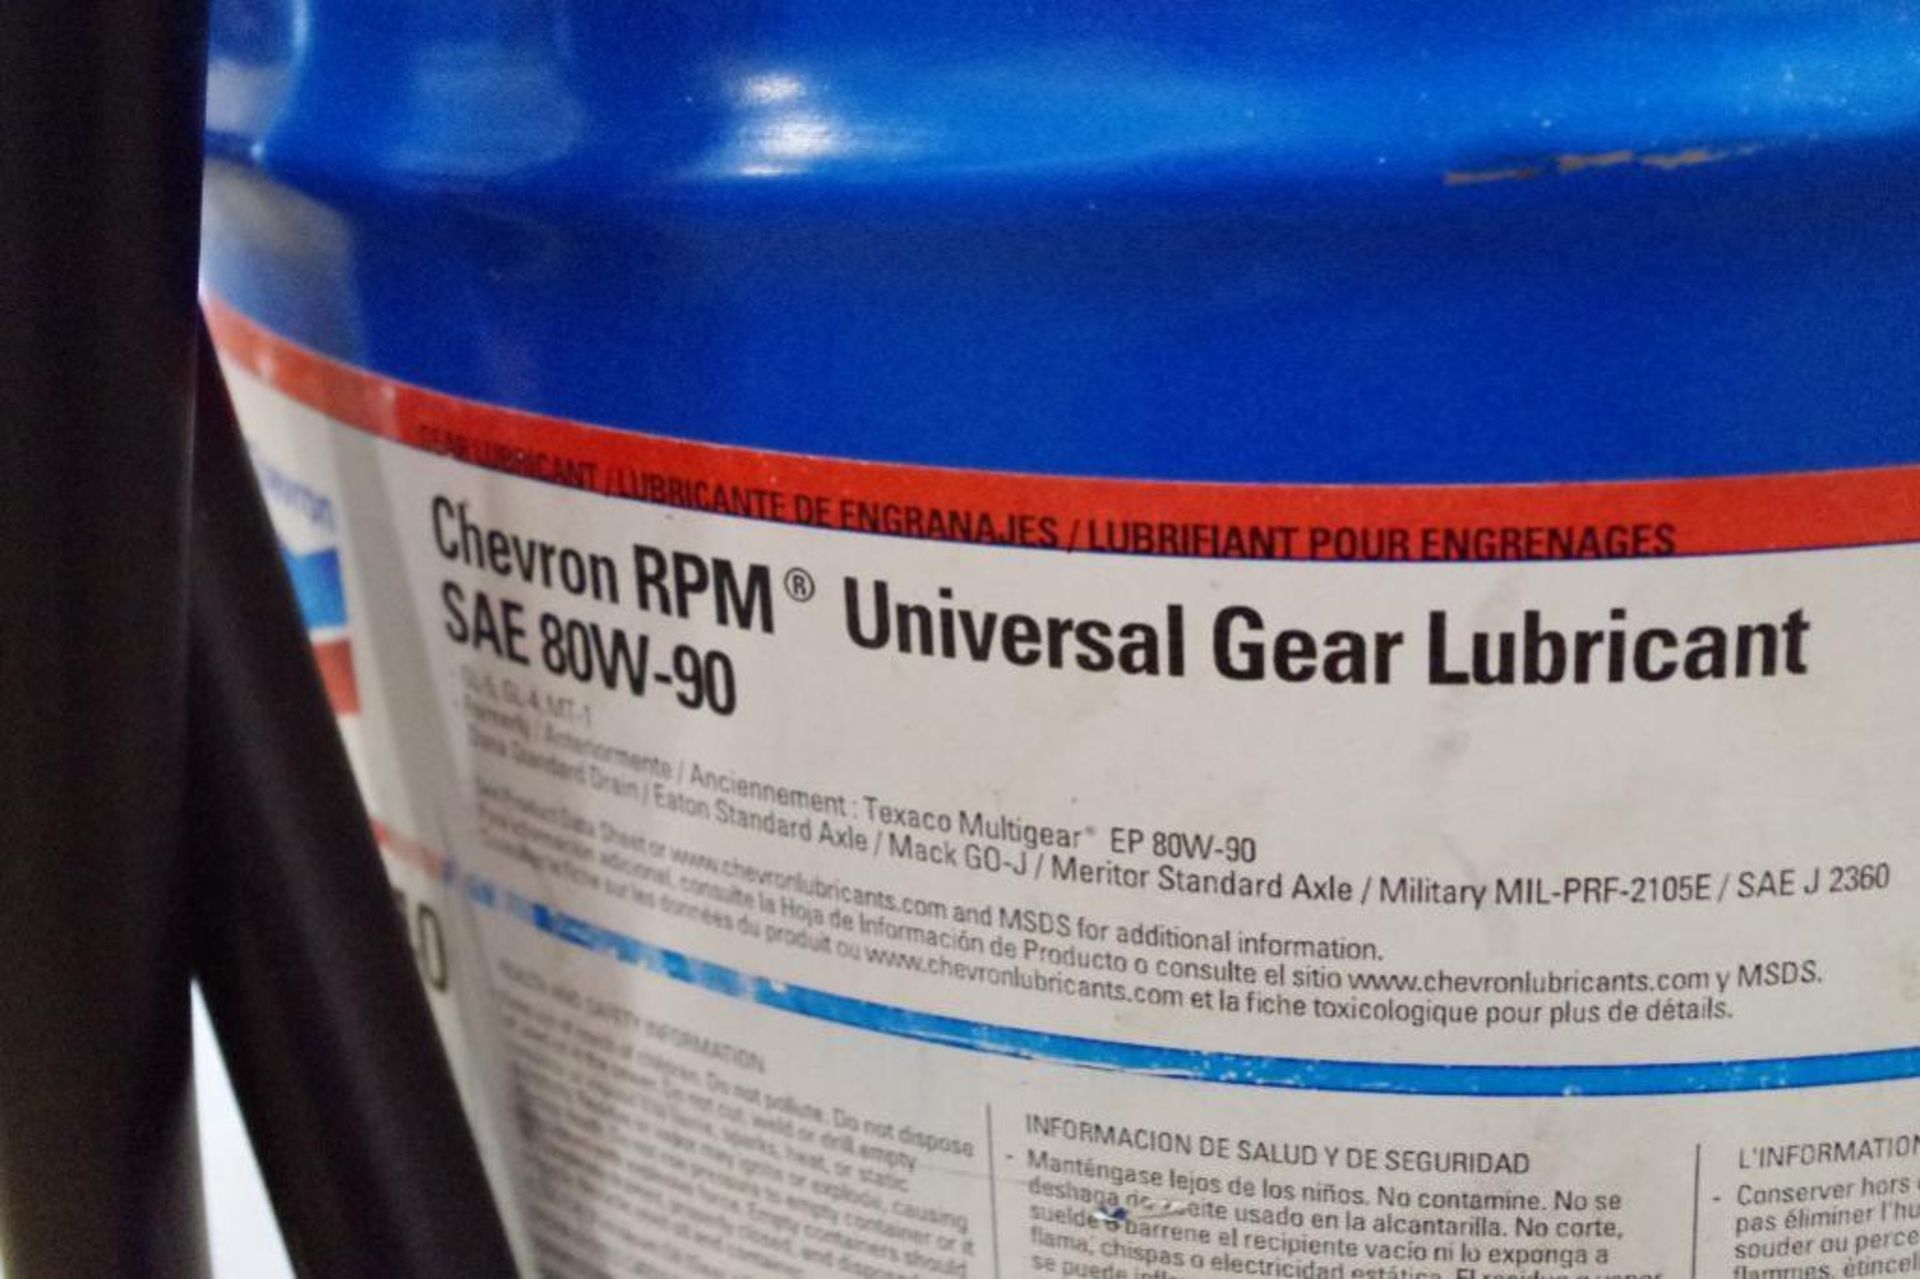 Lubricant Delivery System w/ CHEVRON RPM Universal Gear Lubricant (Mostly Empty) - Image 2 of 3